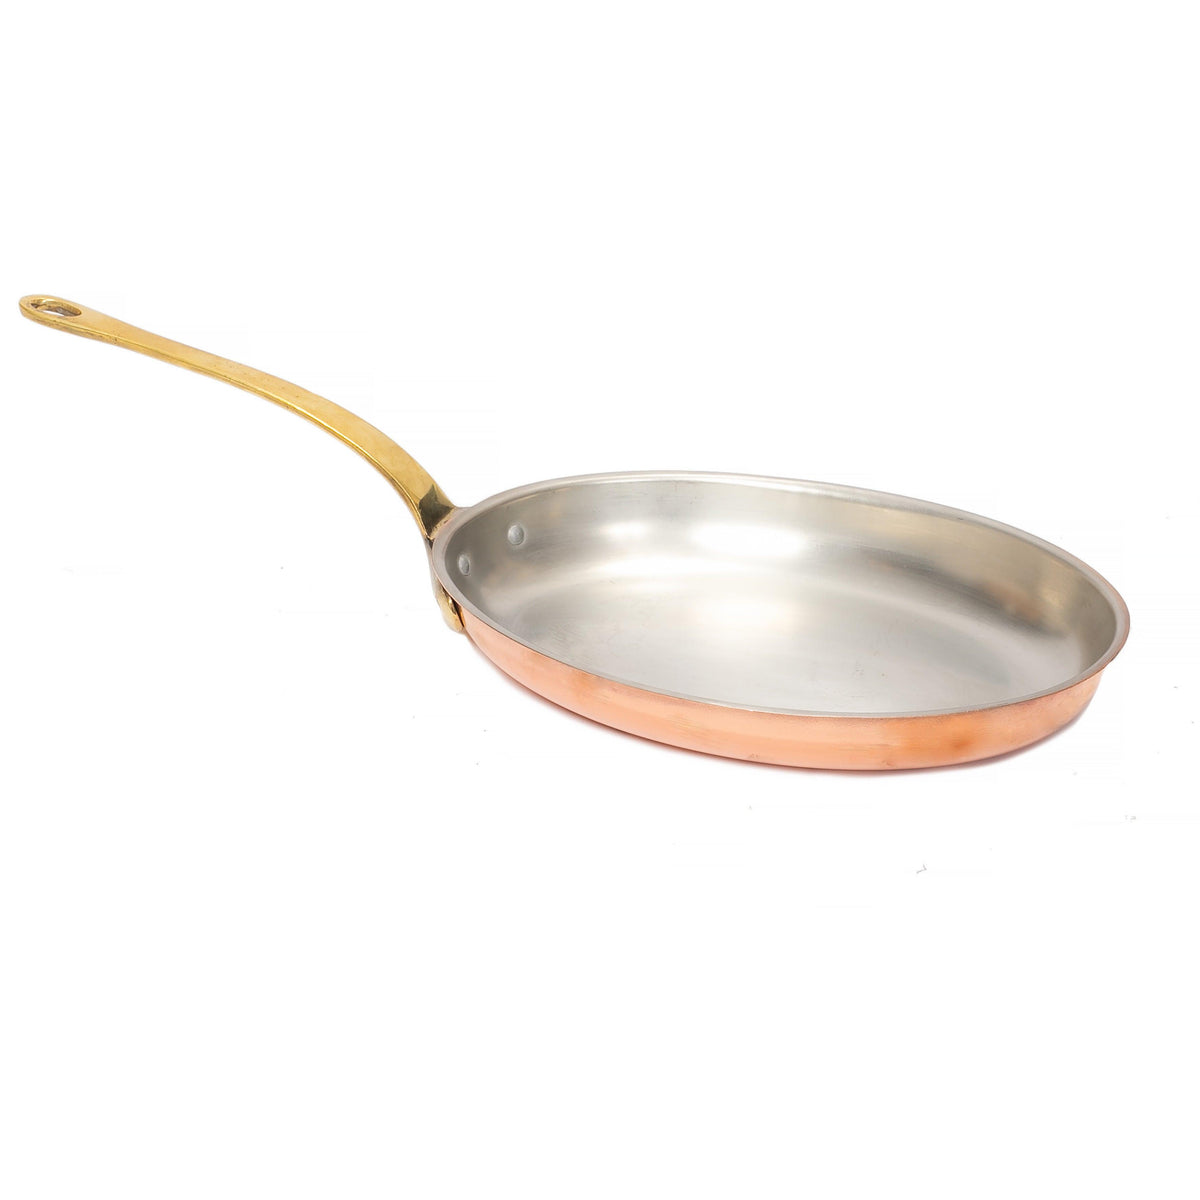 Oval Copper Fry Pan With Handle 38 x 23cm - Handle Length 22cm - BESPOKE77